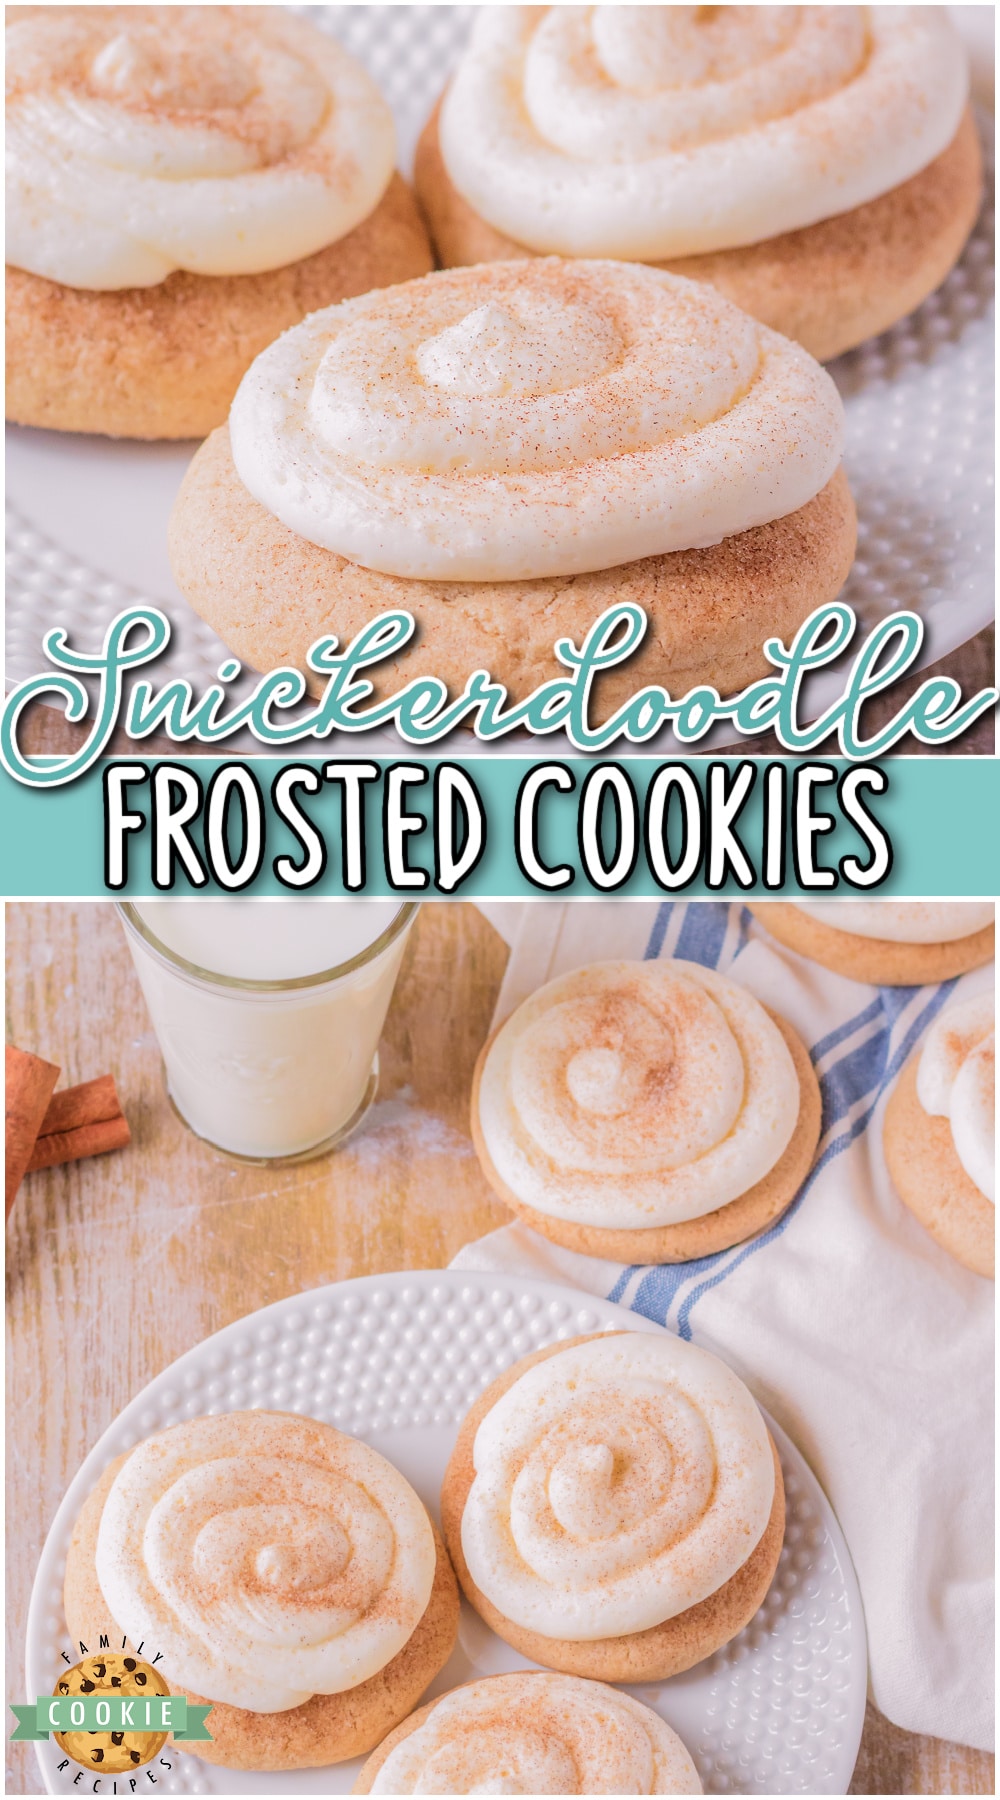 Frosted Snickerdoodles are a soft, chewy cookie rolled in cinnamon and sugar topped with homemade Buttercream Frosting. This snickerdoodle cookie with frosting is the perfect homemade cookie that tastes gourmet!